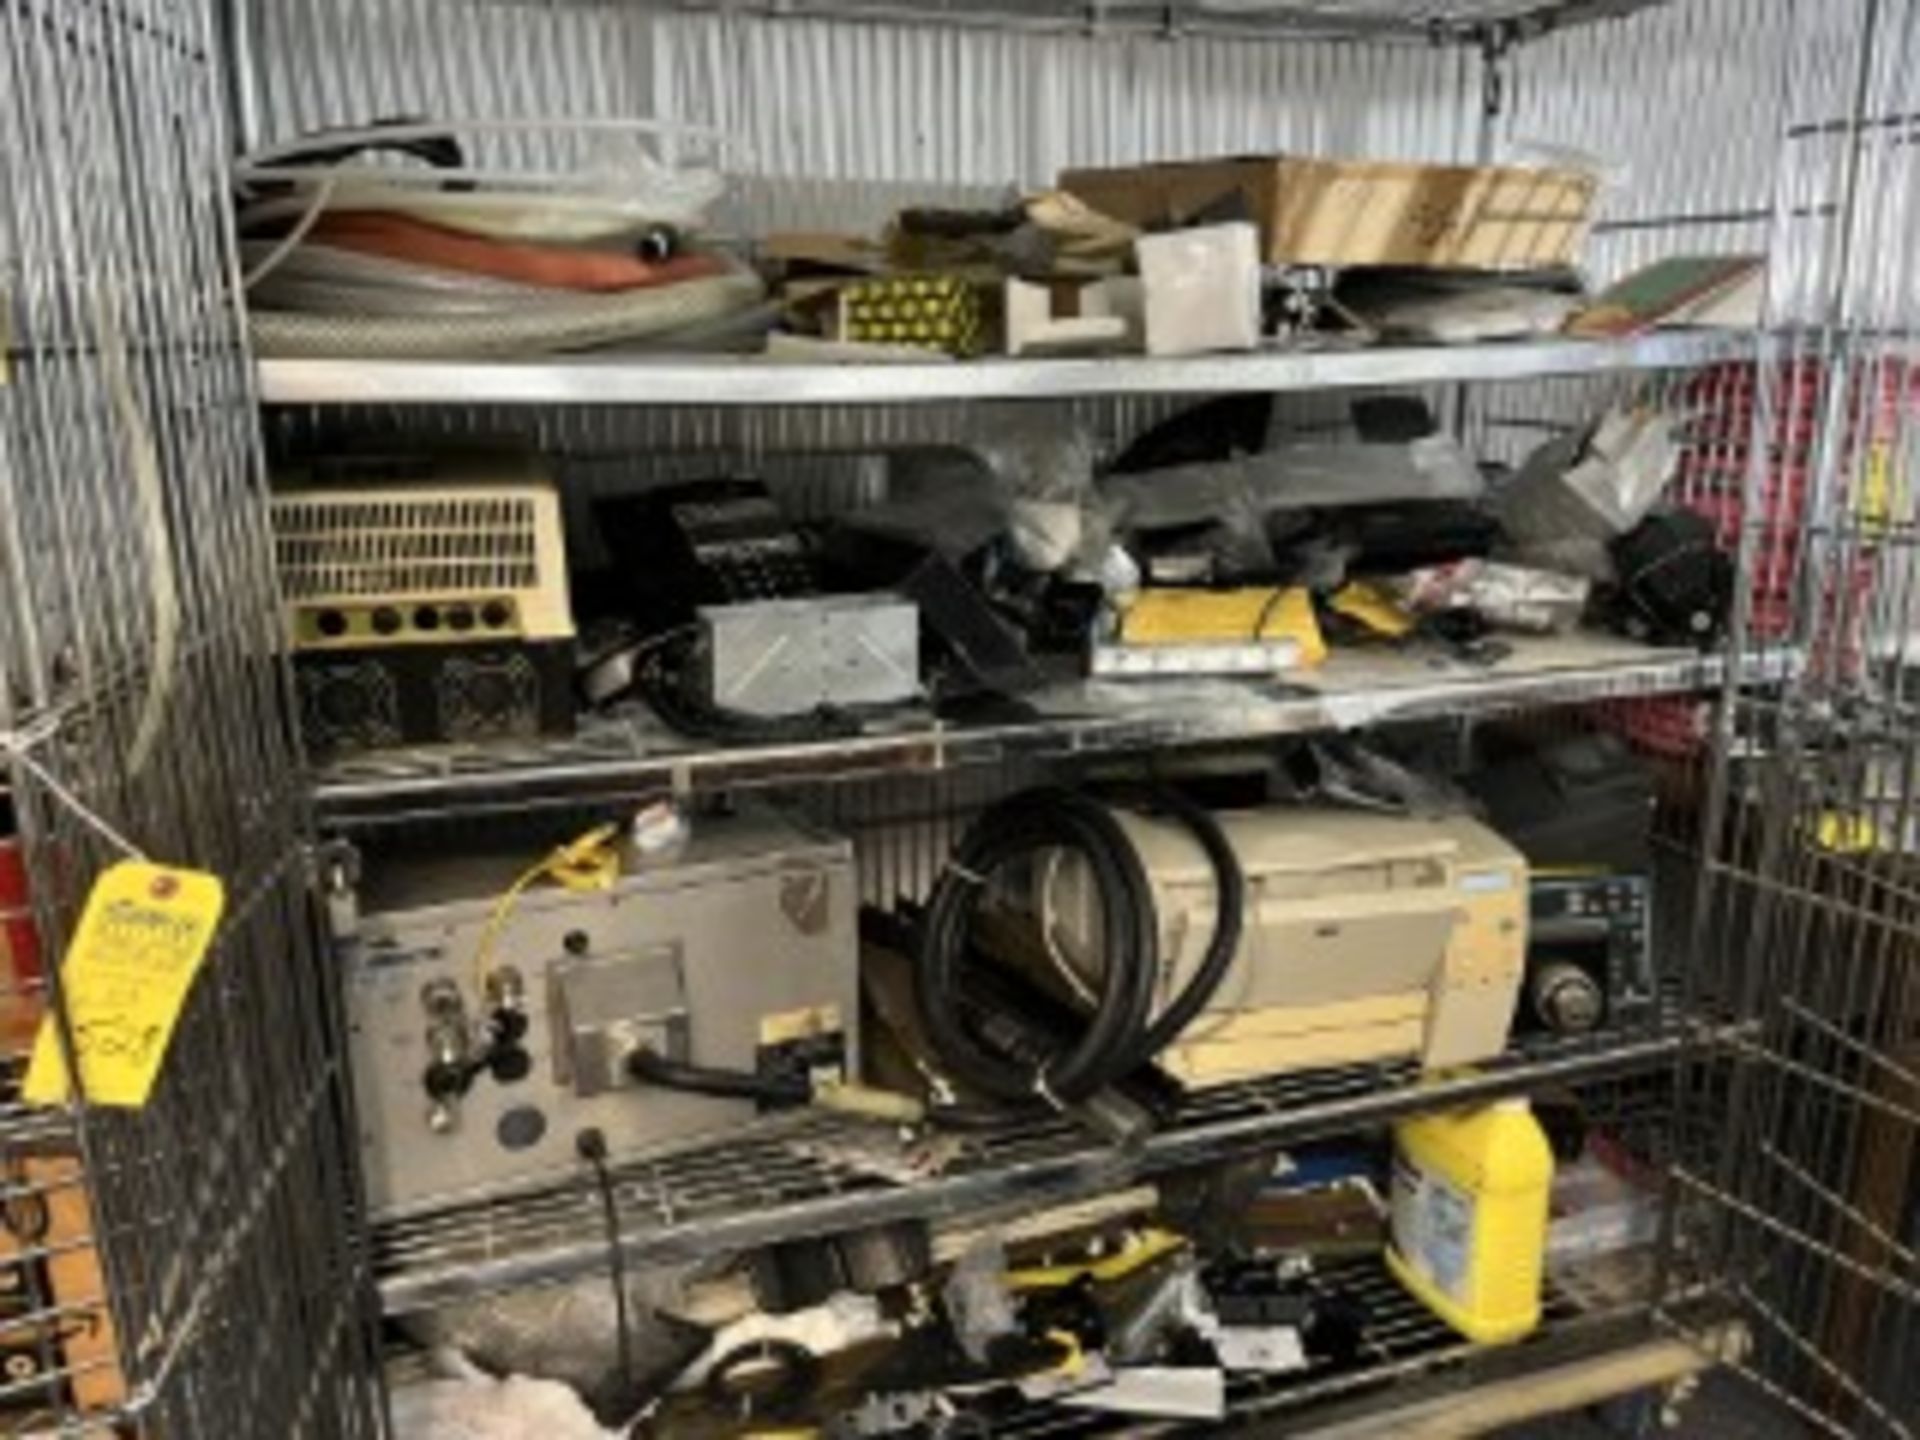 LOT CONTENTS OF CAGE - PRINTERS, ANALYZERS, LIGHTING, HOSES, ETC